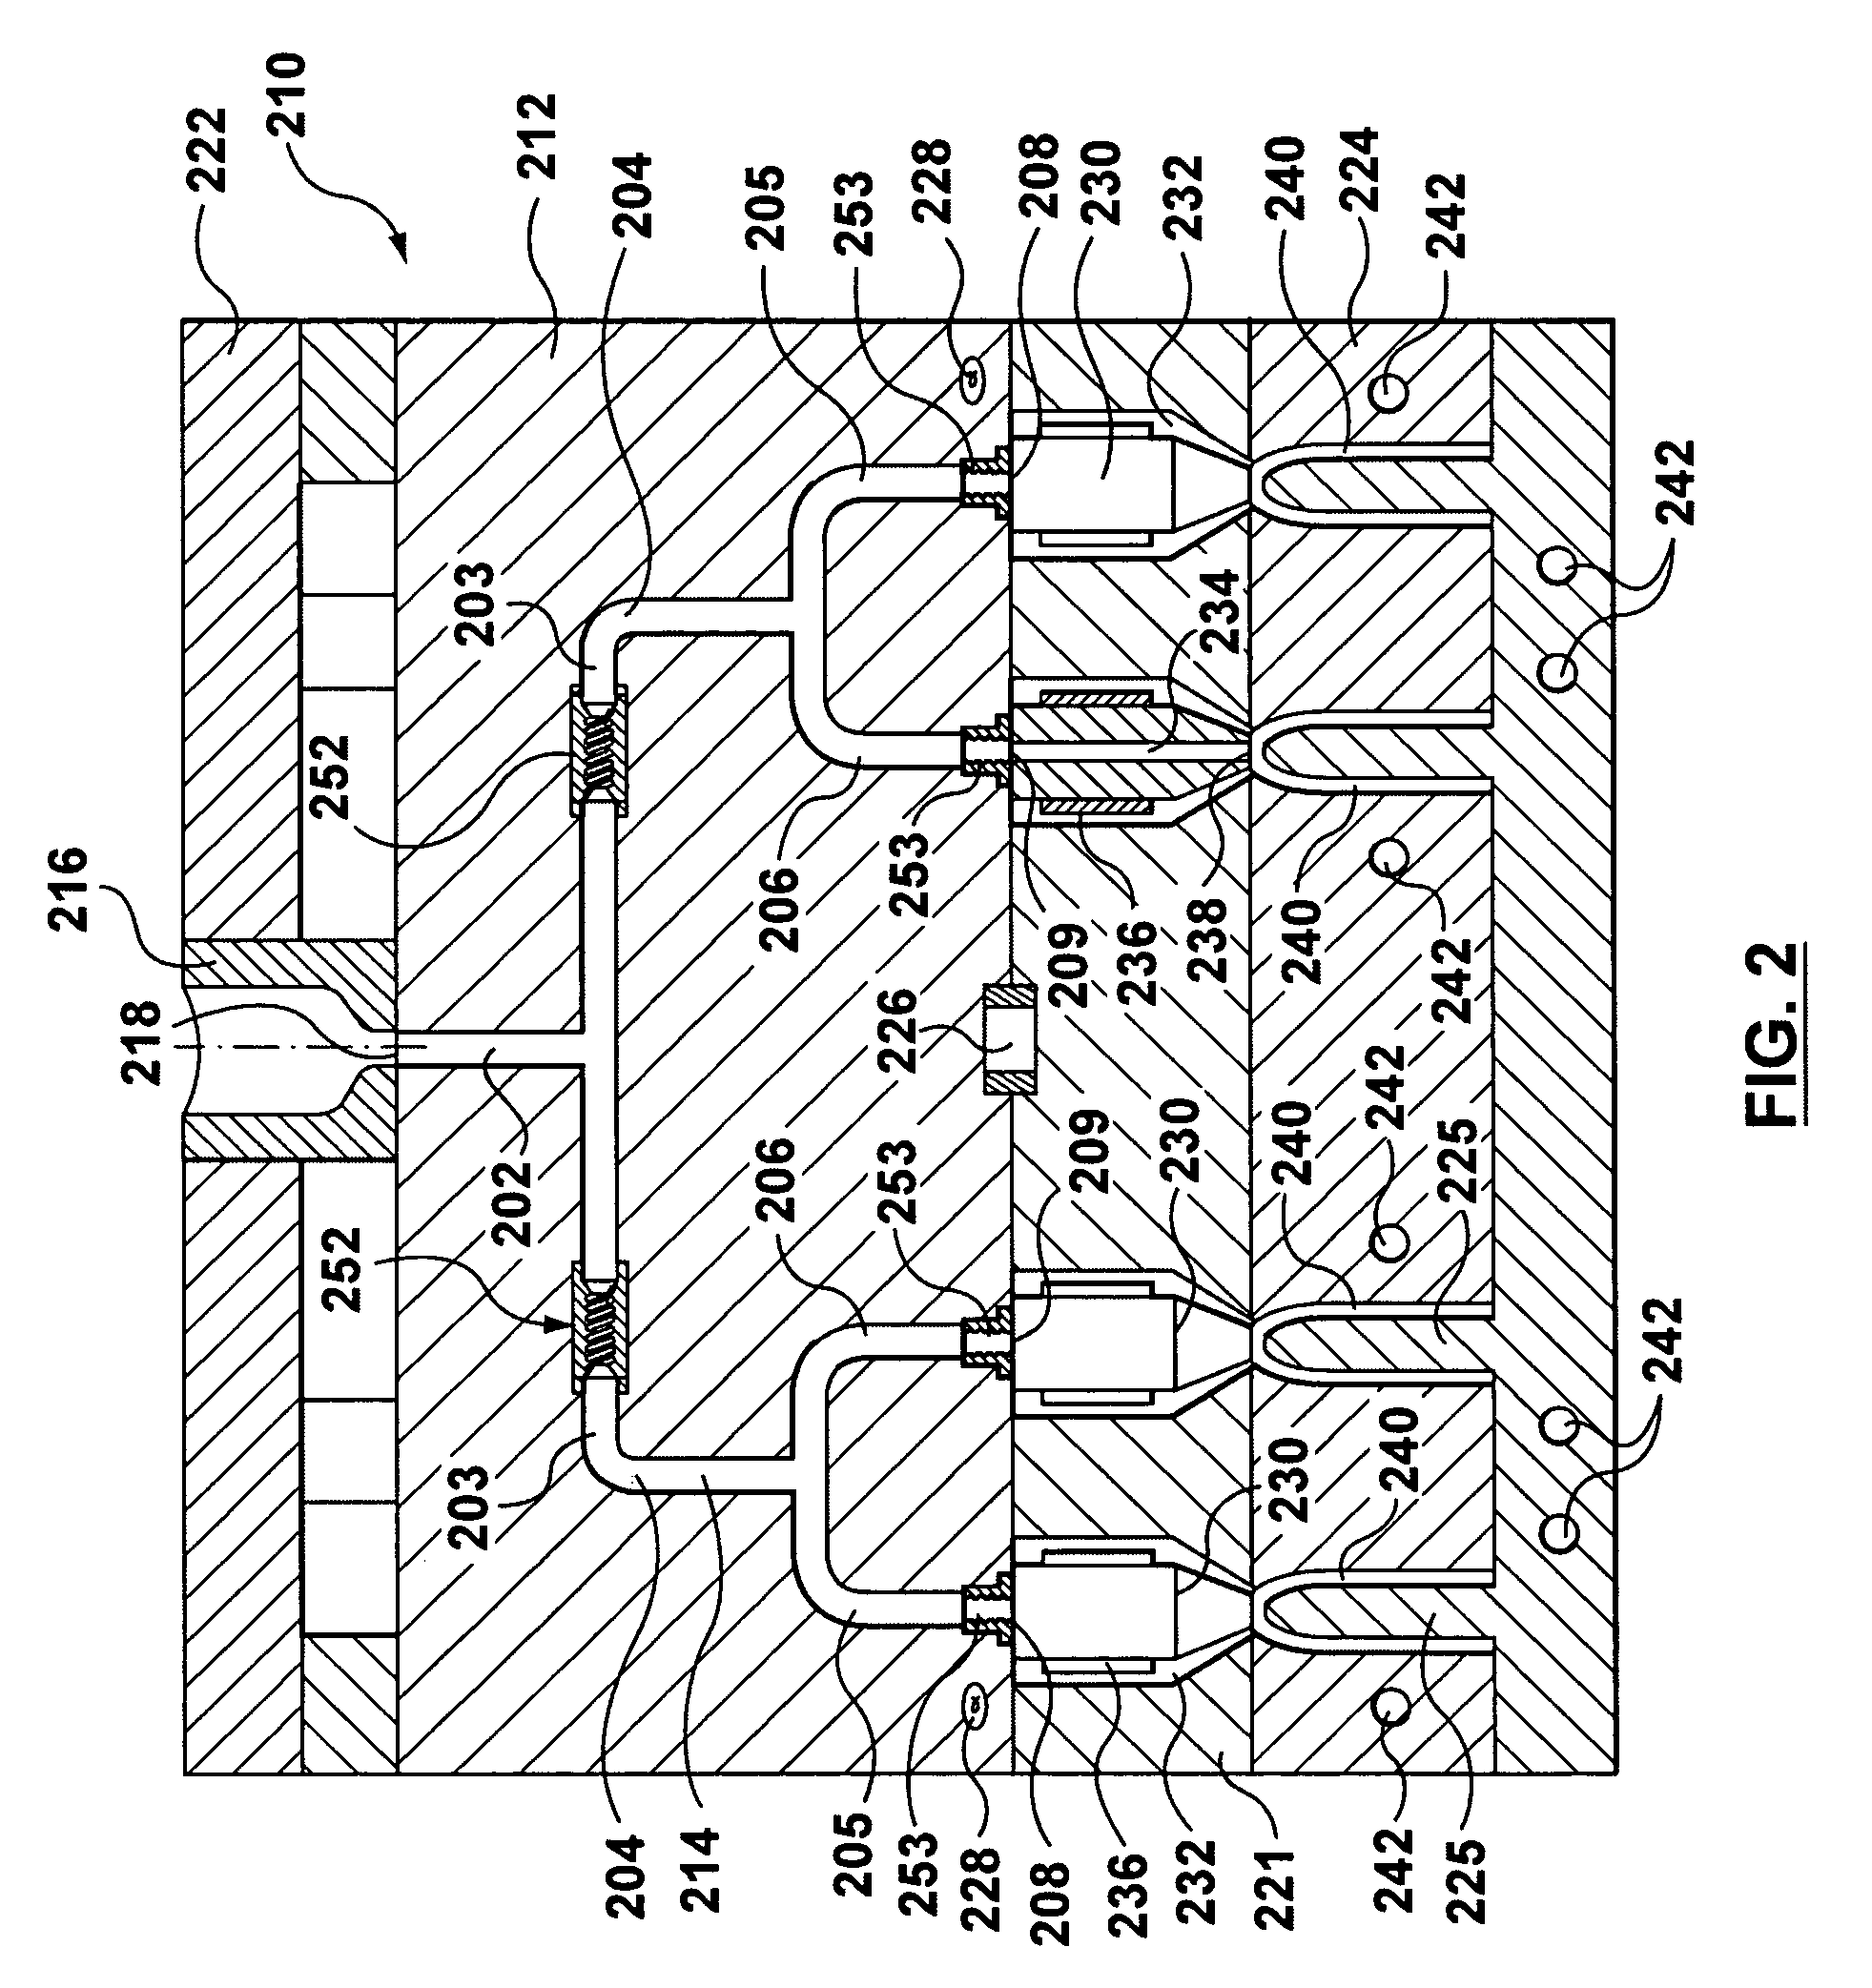 Melt redistribution element for an injection molding apparatus